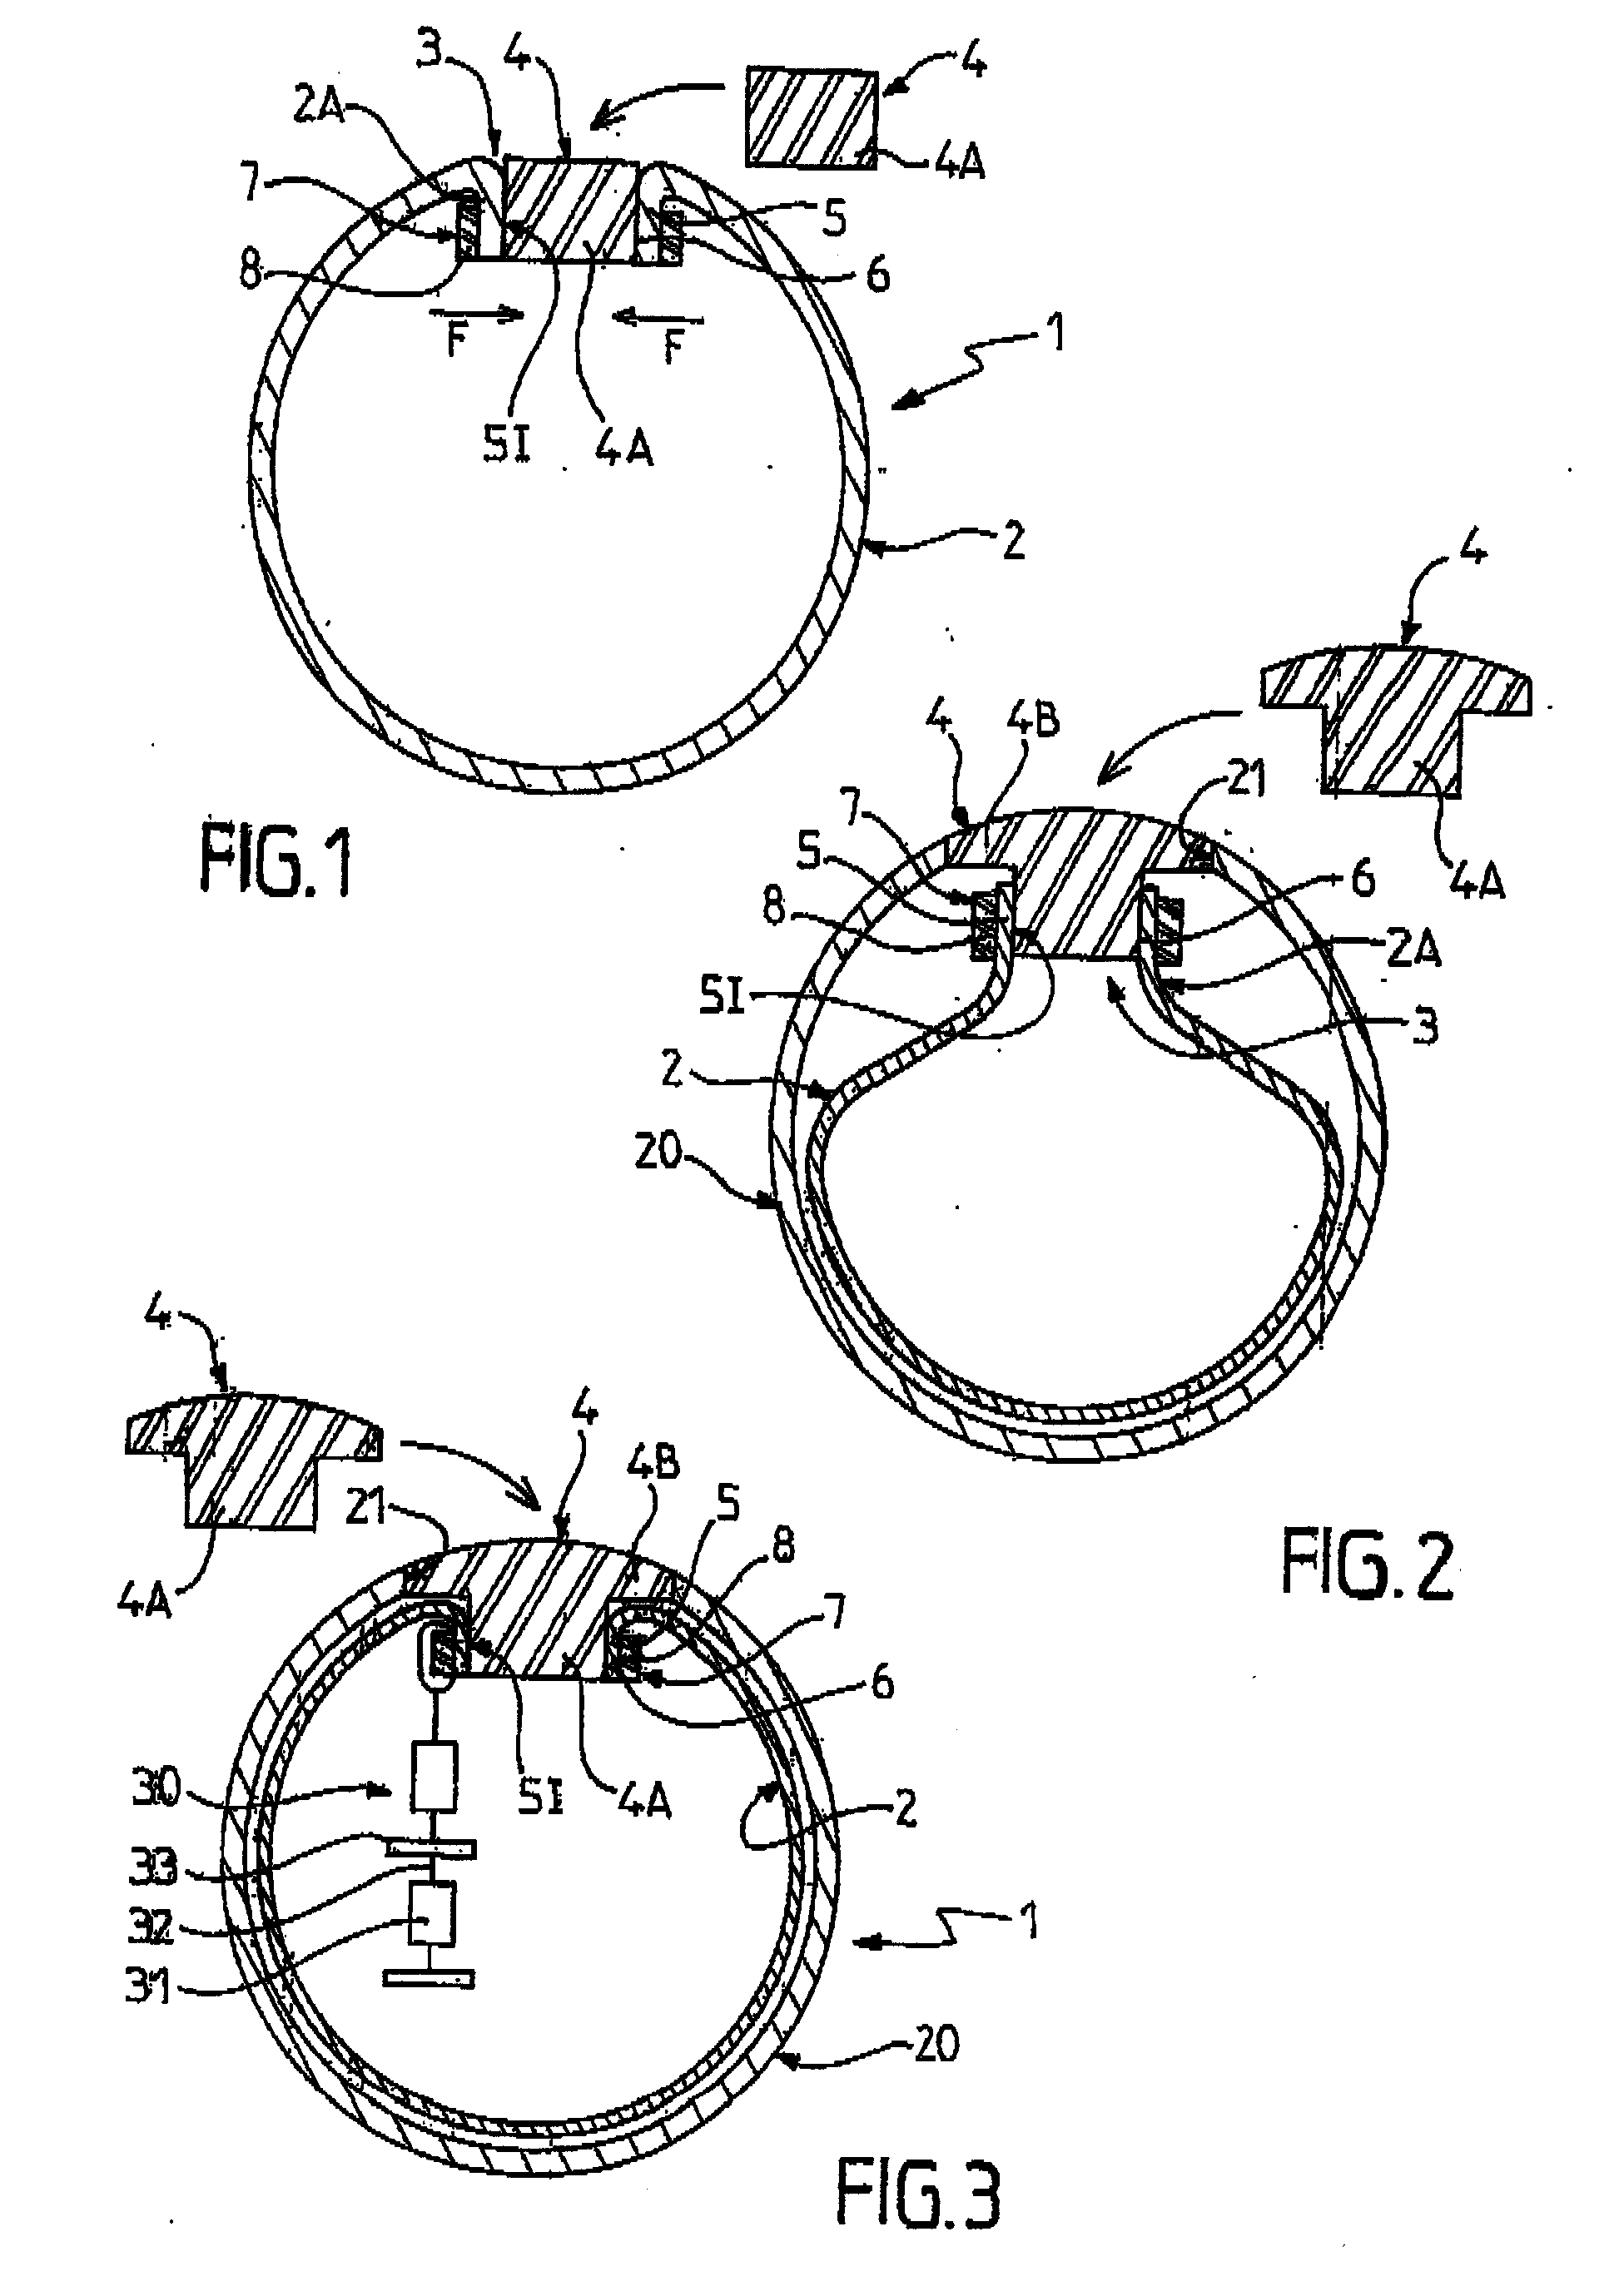 Pouch-Equipped Intragastric Balloon